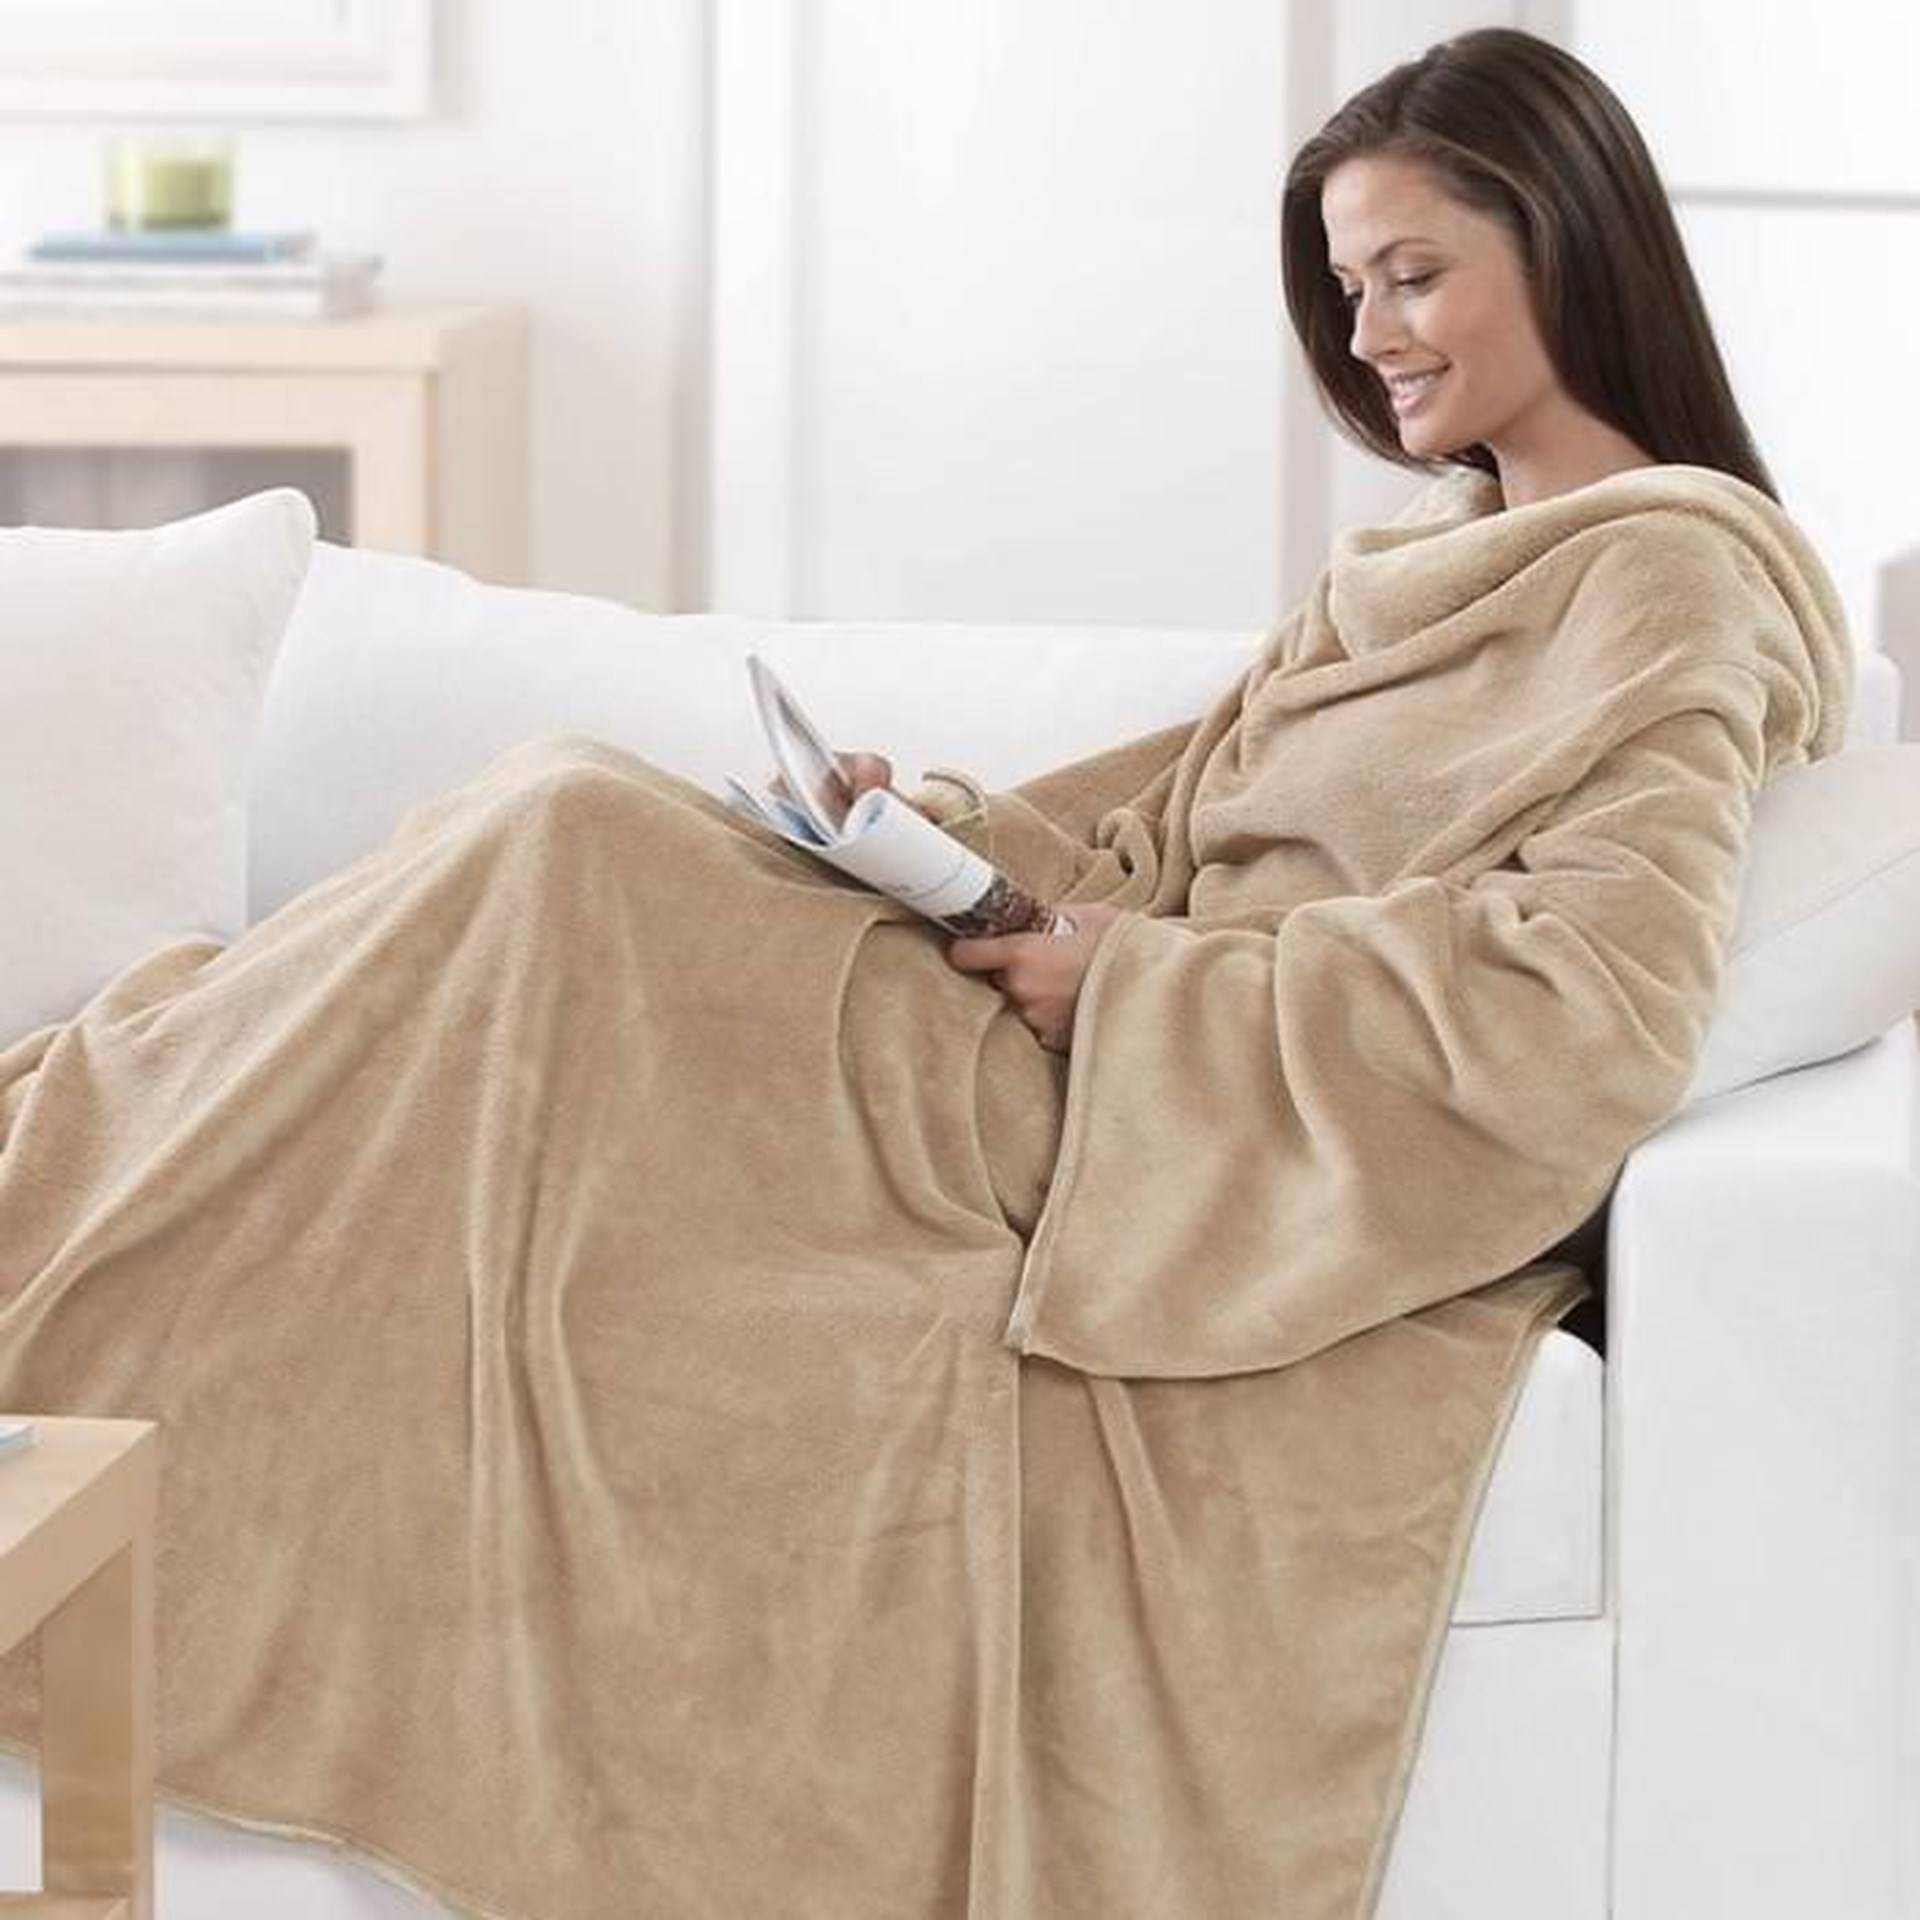 snuggie_woman_couch_reading pinterest